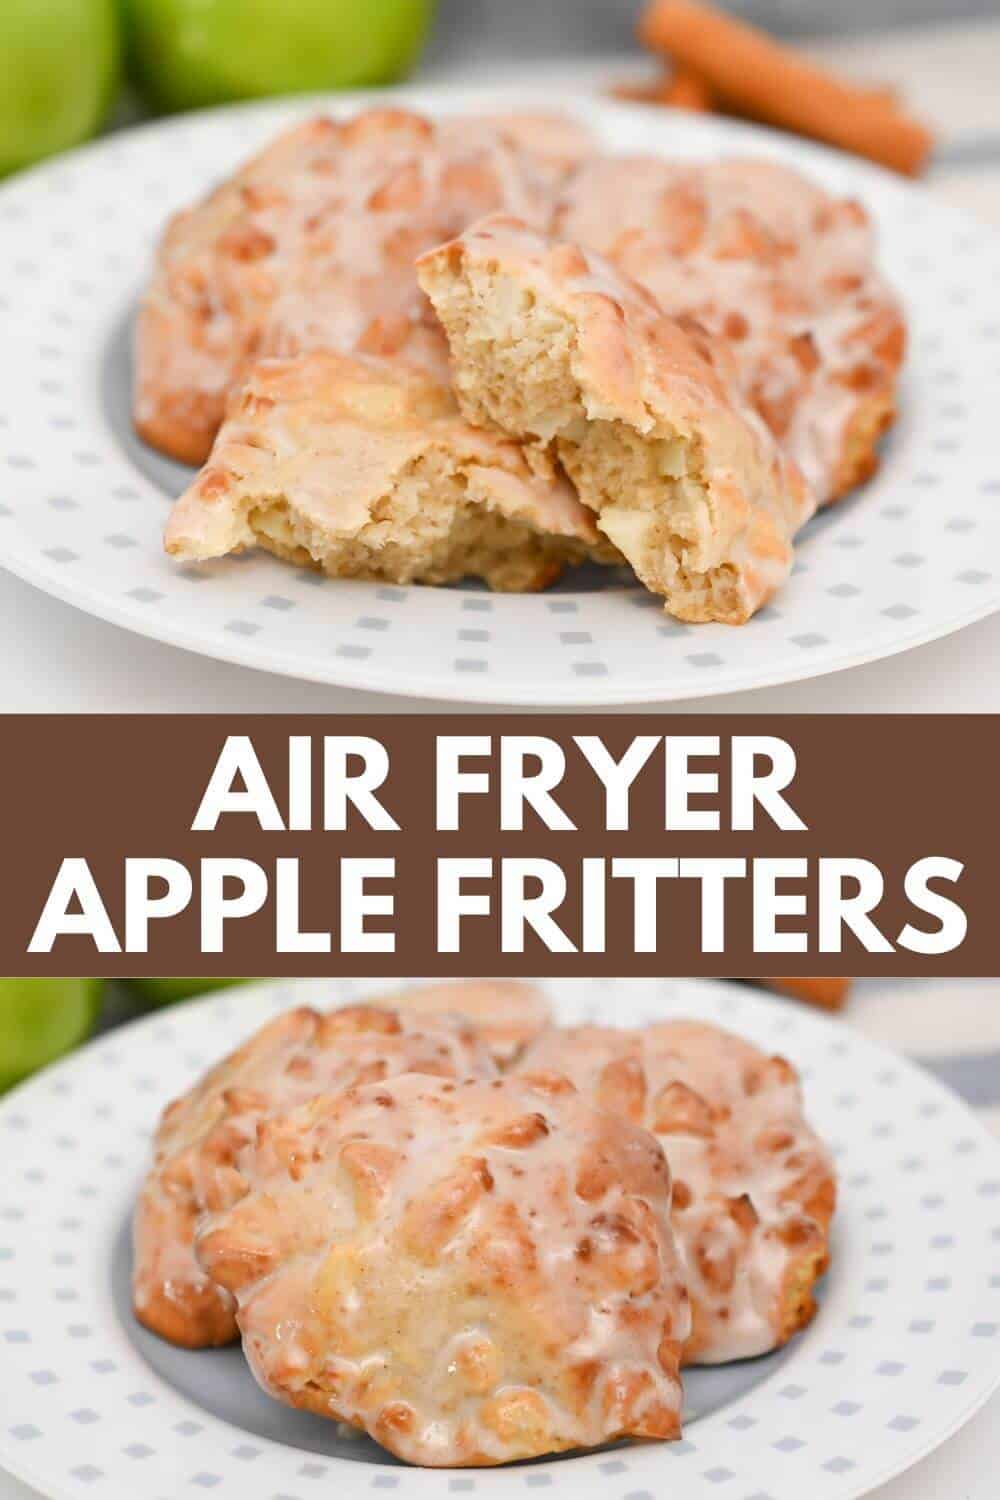 Apple fritters cooked in an air fryer.